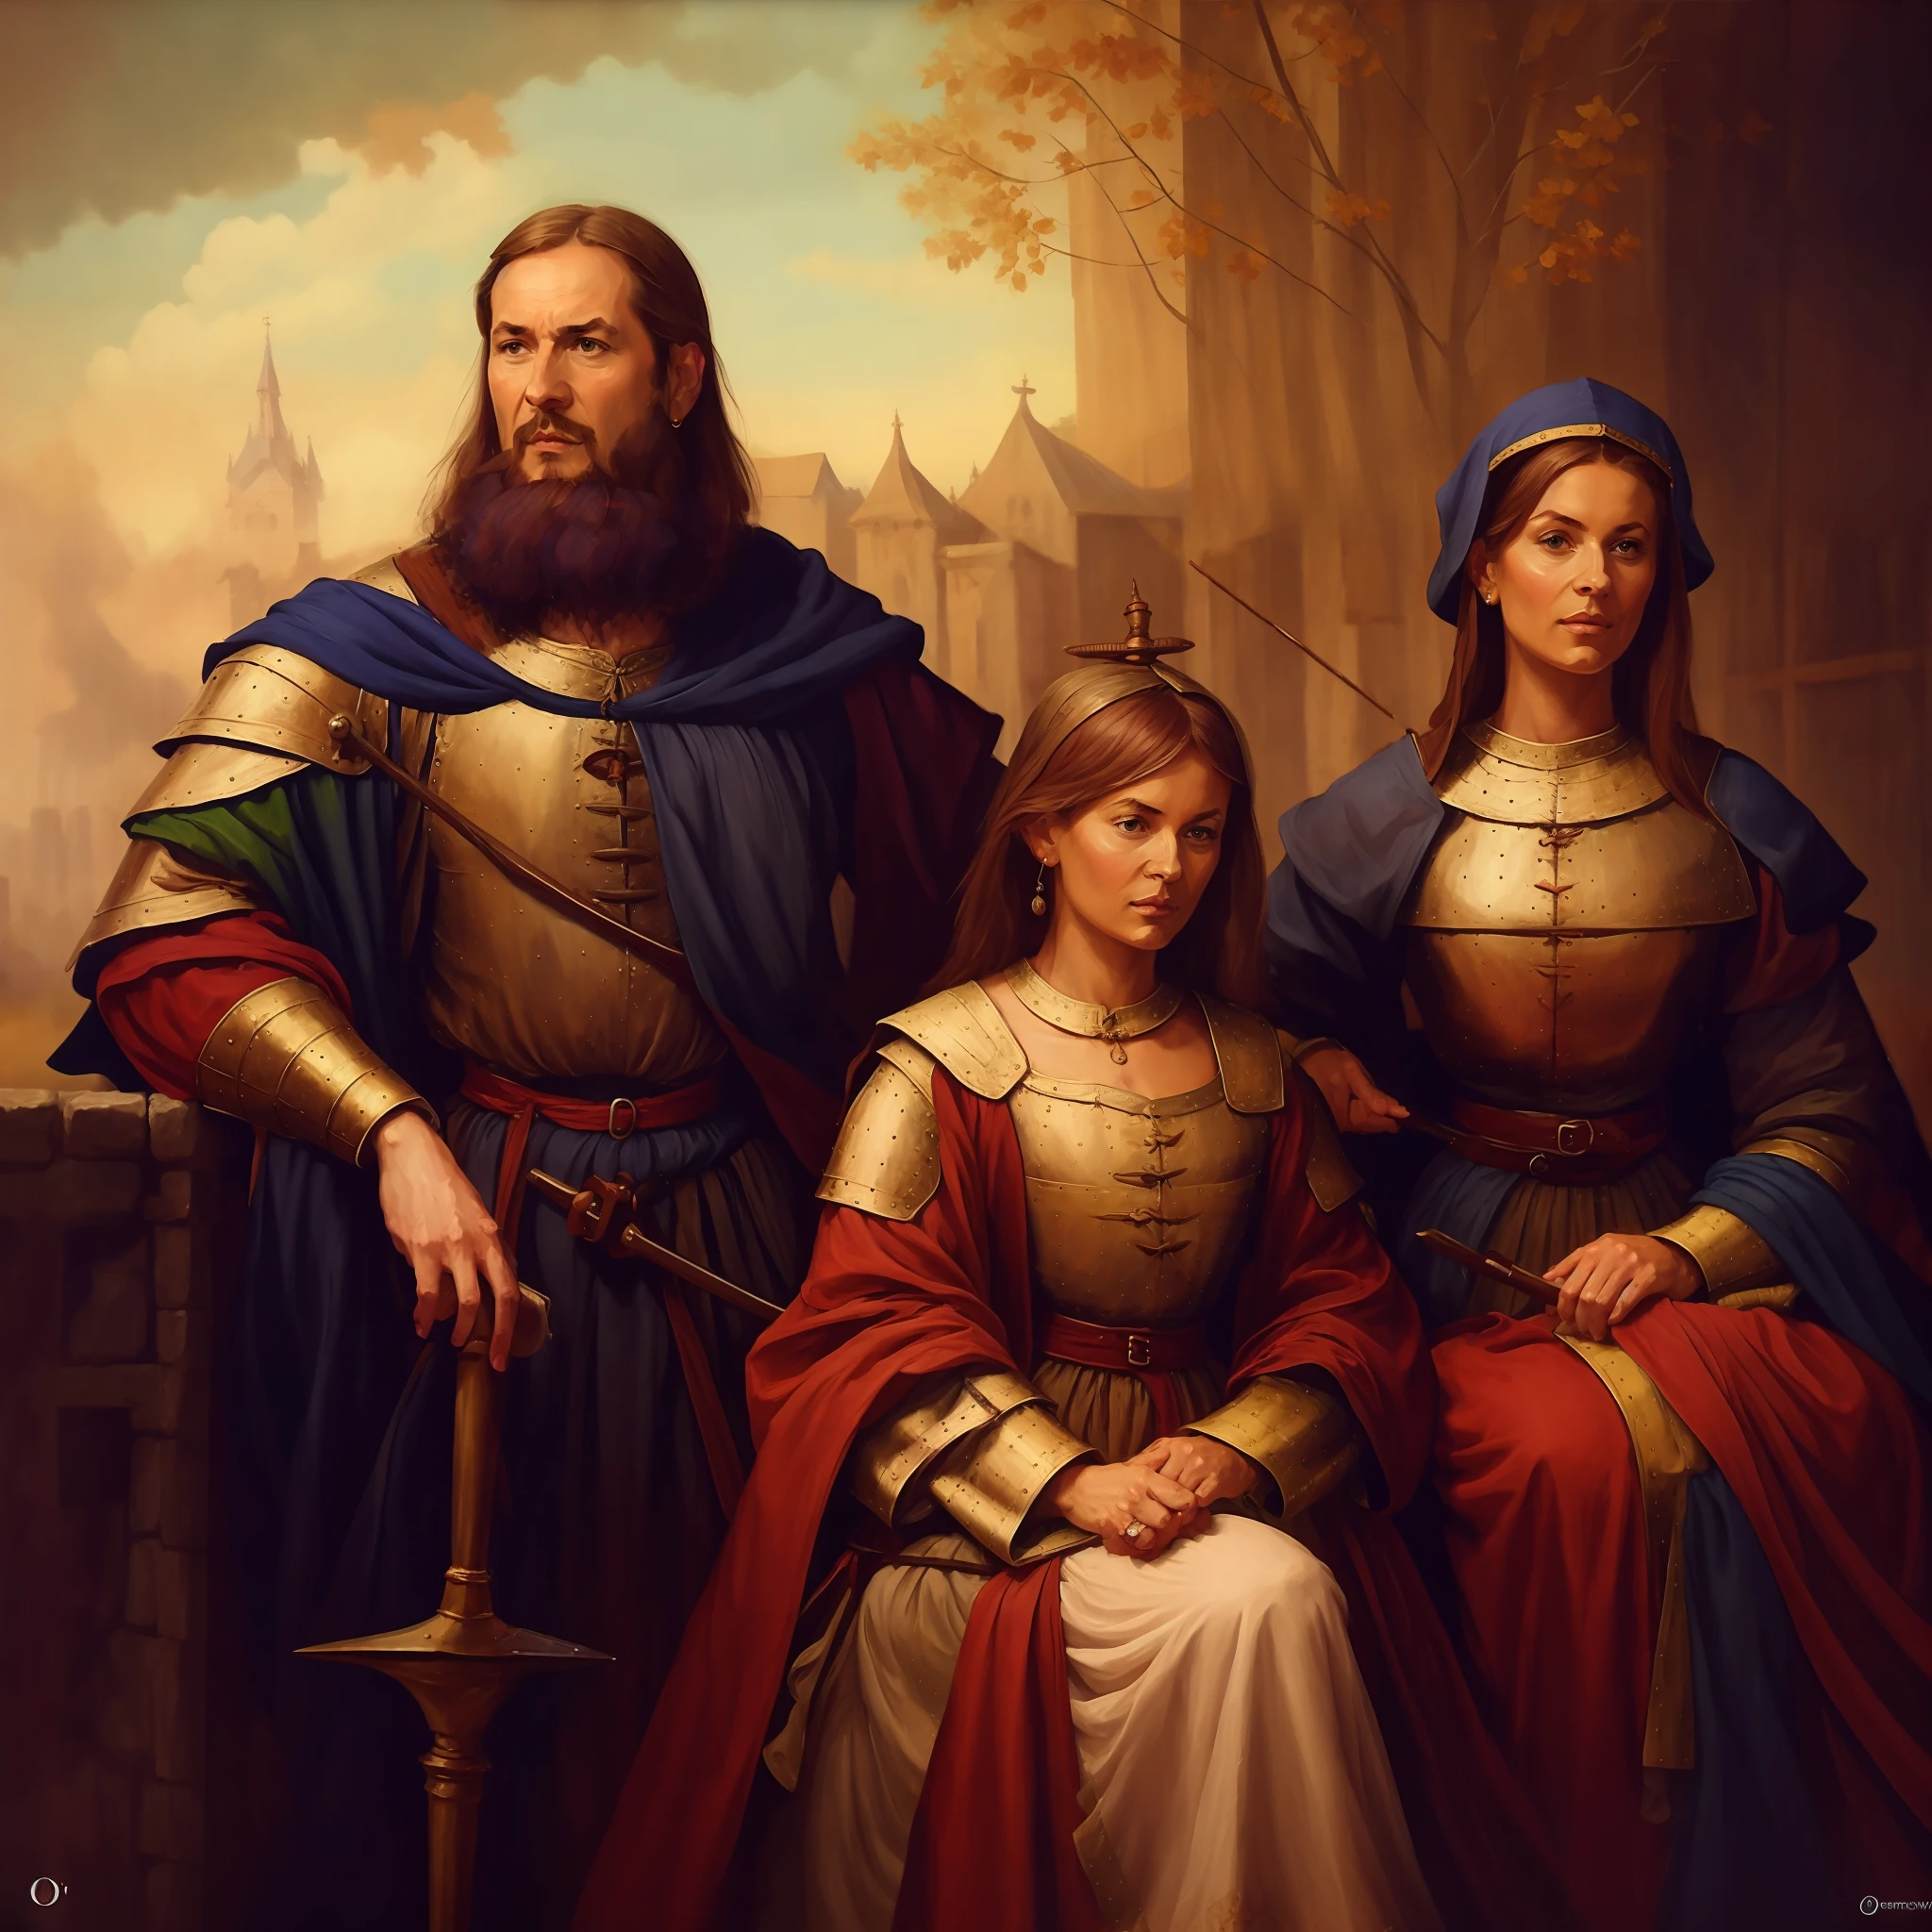 painting of a man and two women in medieval clothing sitting on a bench, renaissance digital painting, arte do jogo de medieval fantasy, baroque digital painting, arte de medieval fantasy, Directed by: Alexander Orlovsky, family portrait, Directed by: Eugene Zak, Directed by: Piotr Michalowski, medieval fantasy, Directed by: Tadeusz Pruszkówski